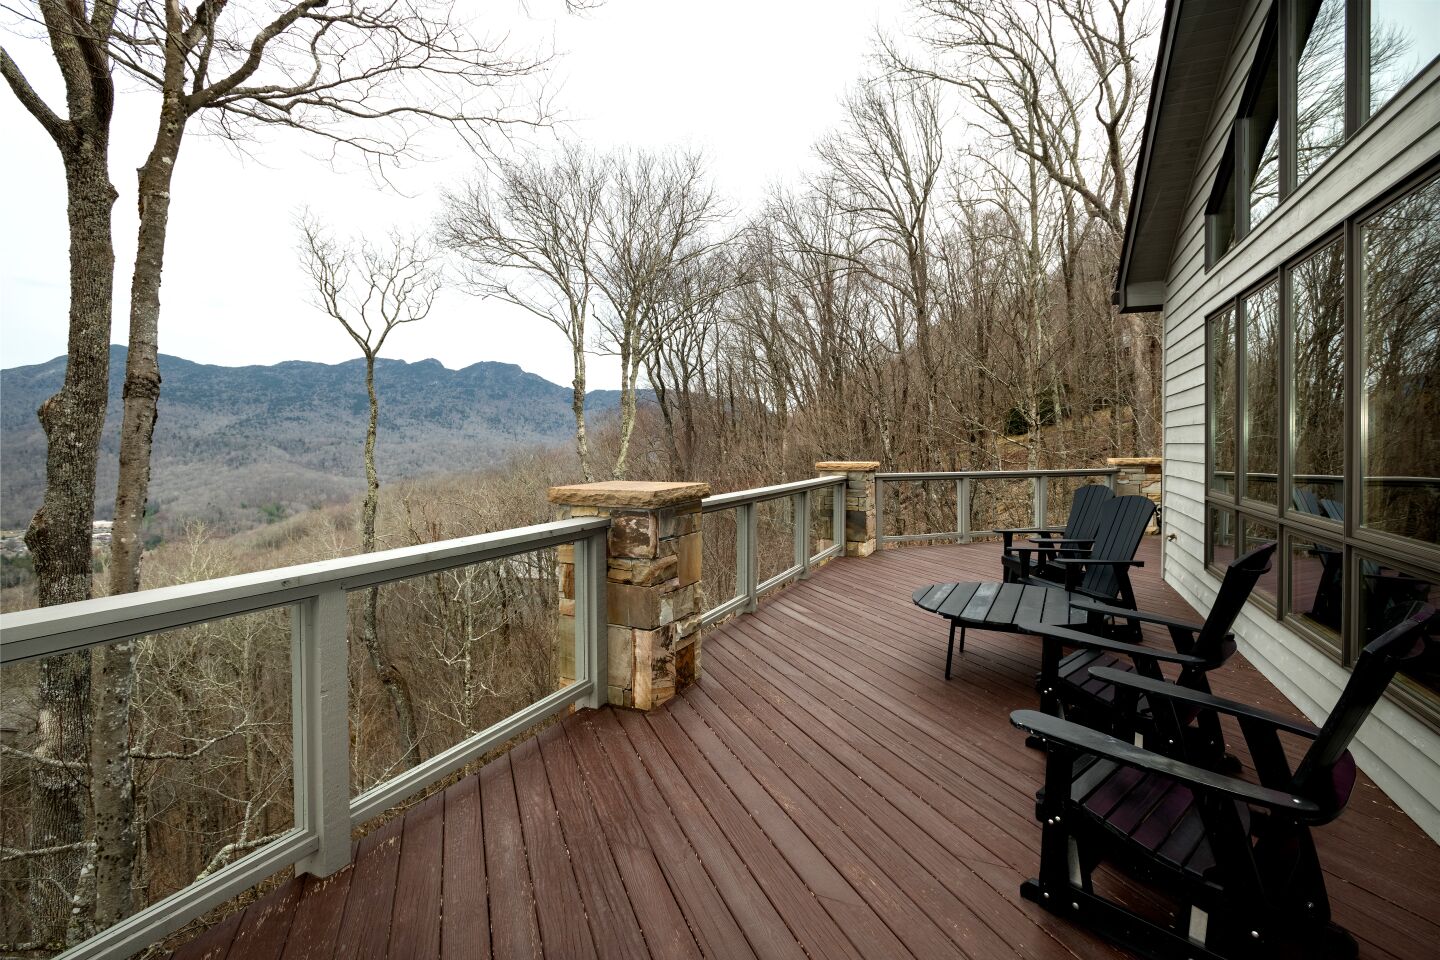 Outdoor decking takes in sweeping mountain vistas at NASCAR legend Rusty Wallace's North Carolina home.